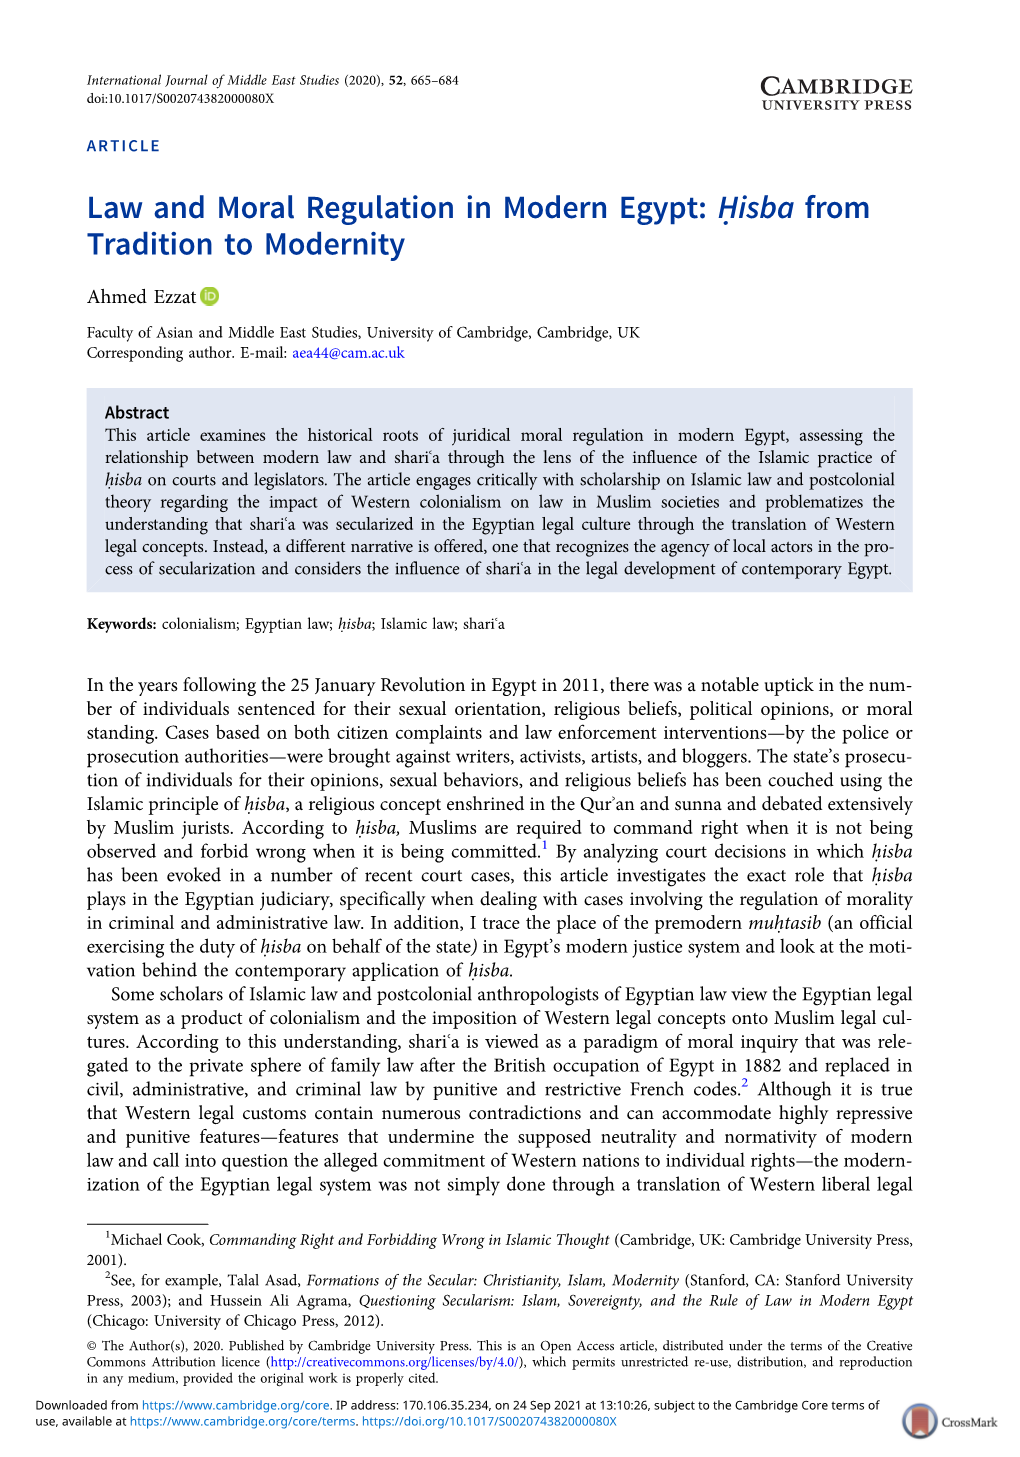 Law and Moral Regulation in Modern Egypt: Ḥisba from Tradition to Modernity